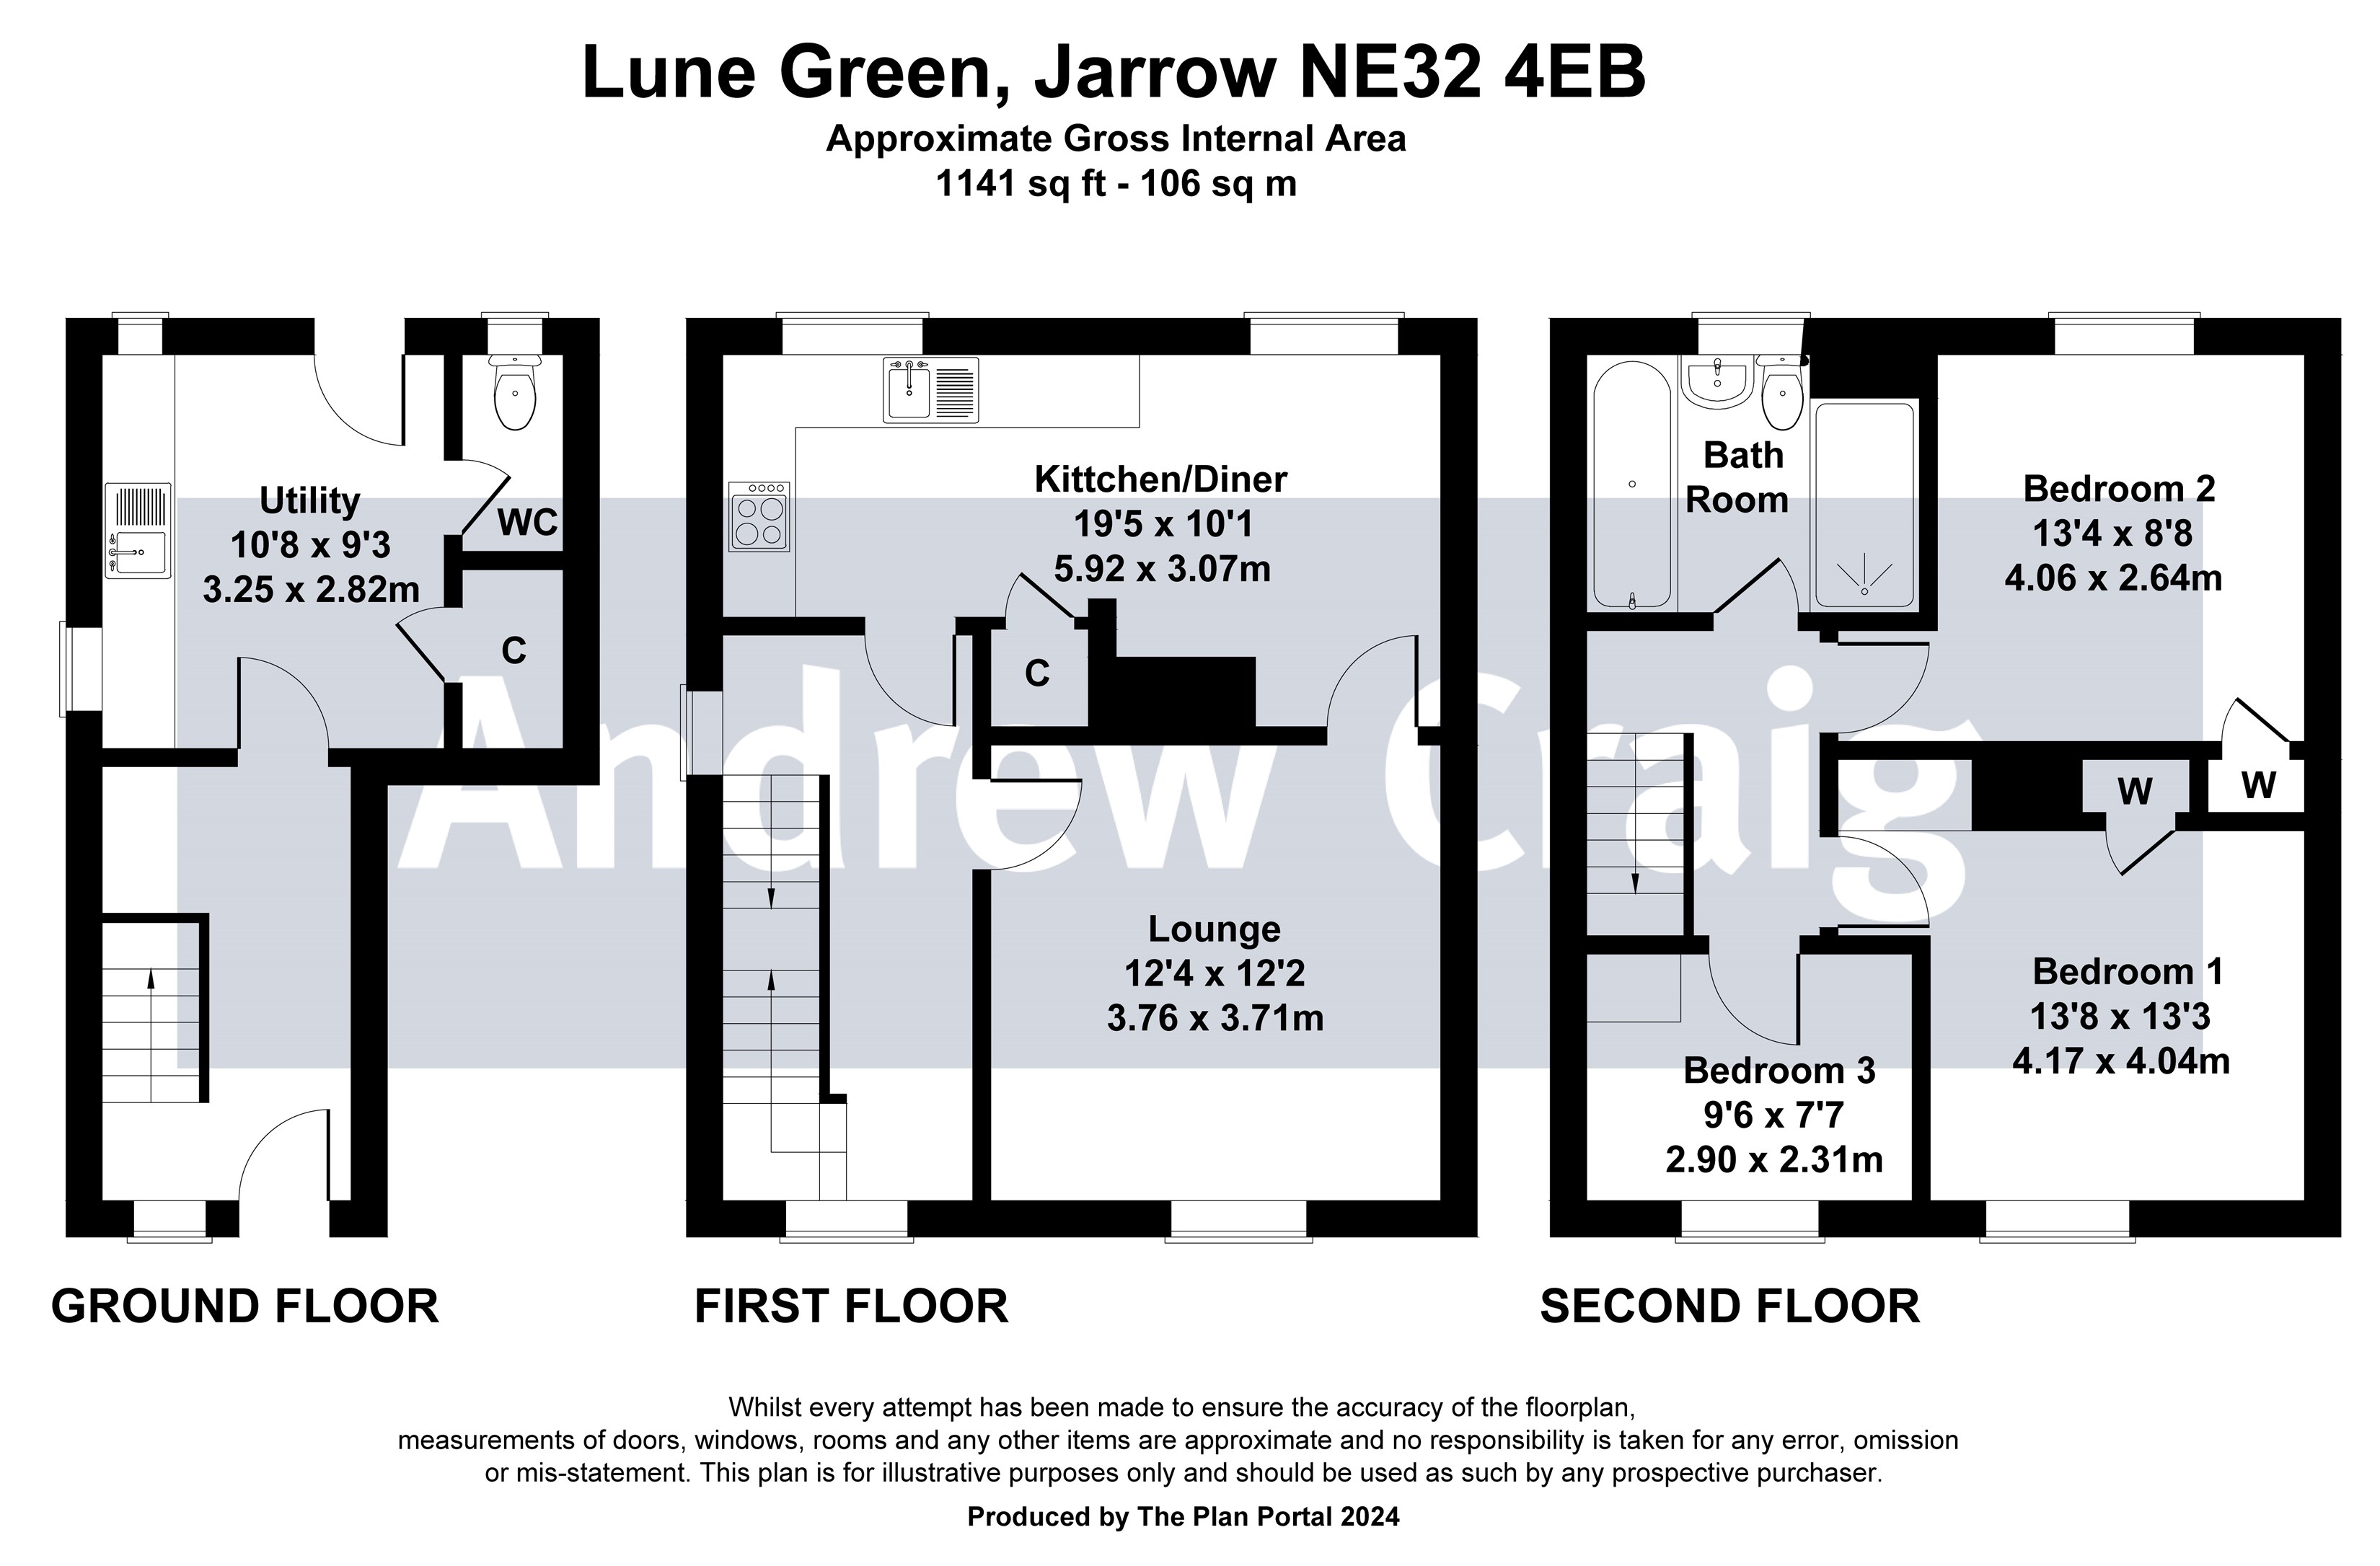 3 bed end of terraced town house for sale in Lune Green, Jarrow - Property floorplan